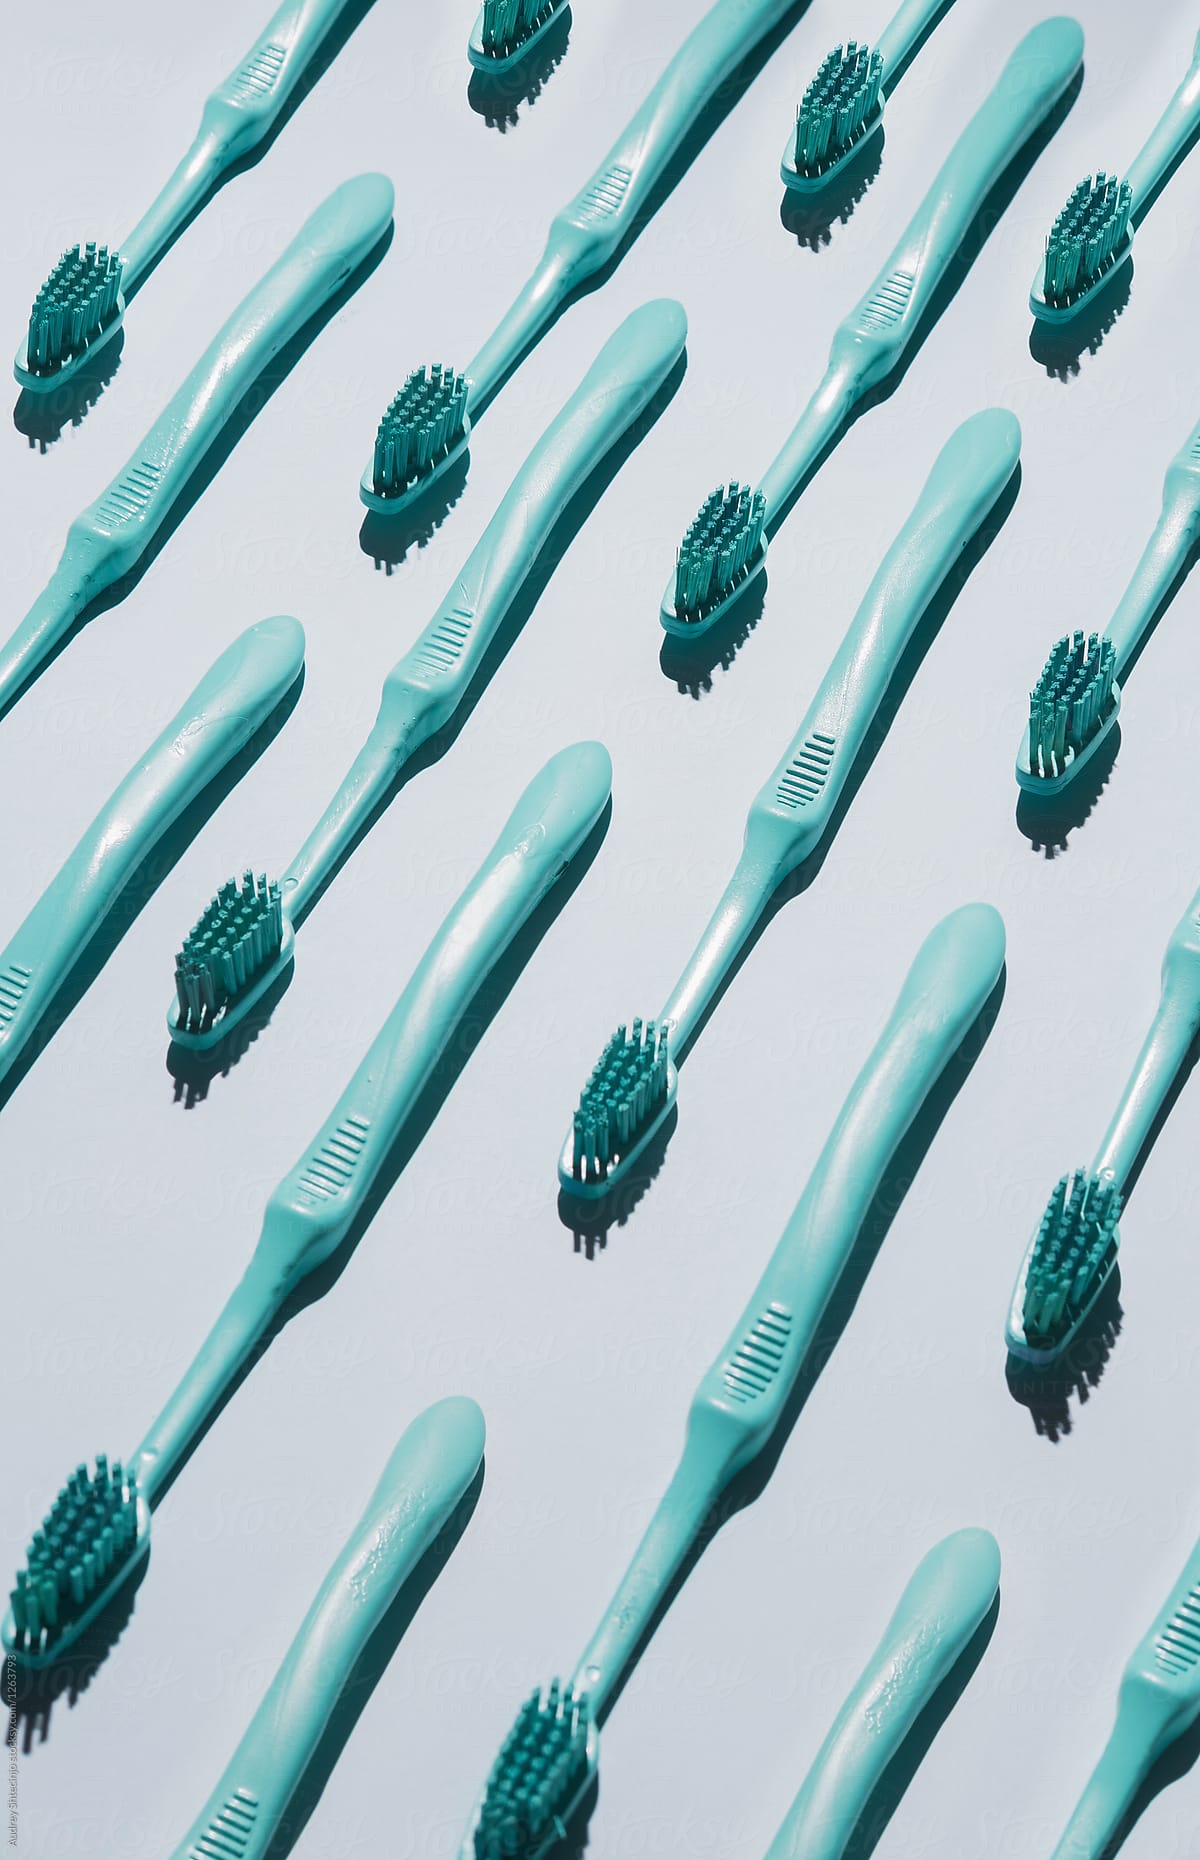 Arranged toothbrushes.